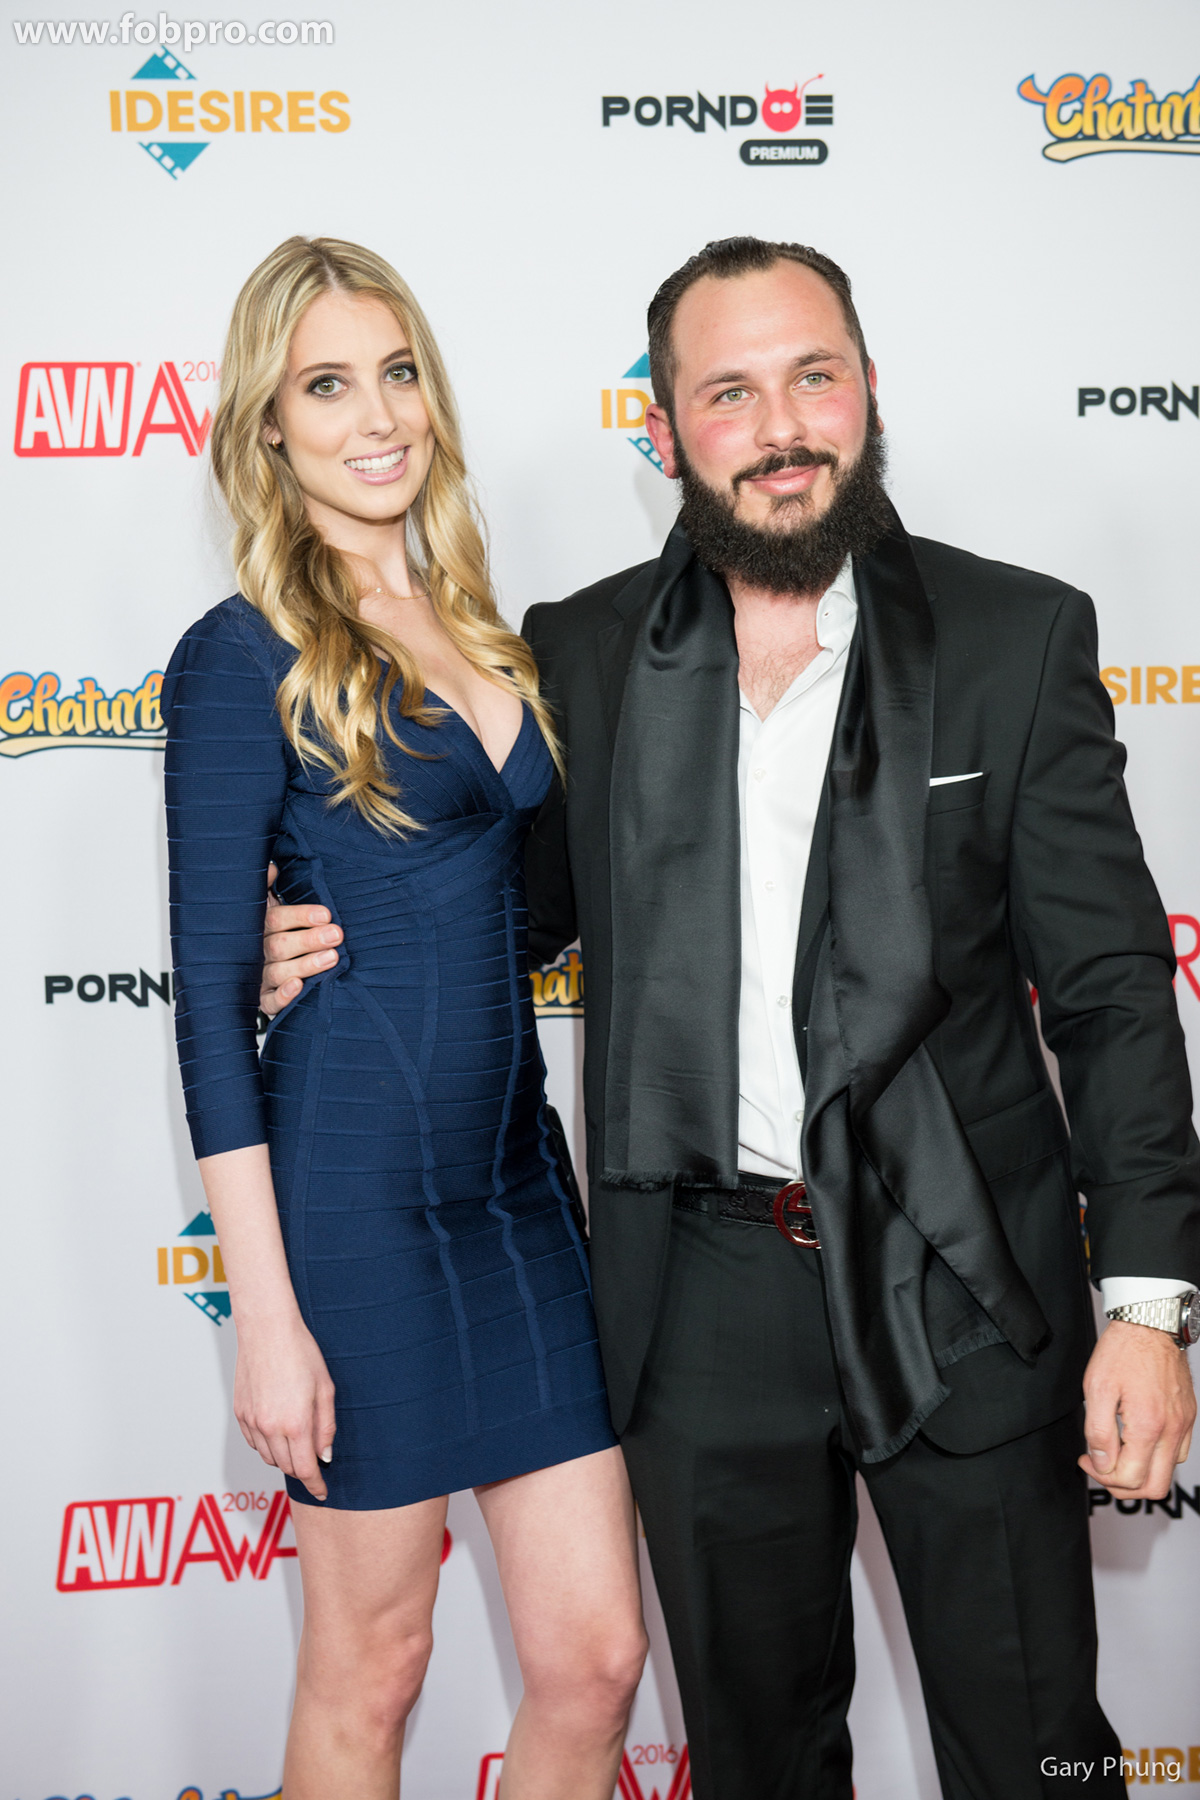 Avn Awards 2016 Page 15 Of 41 Fob Productions